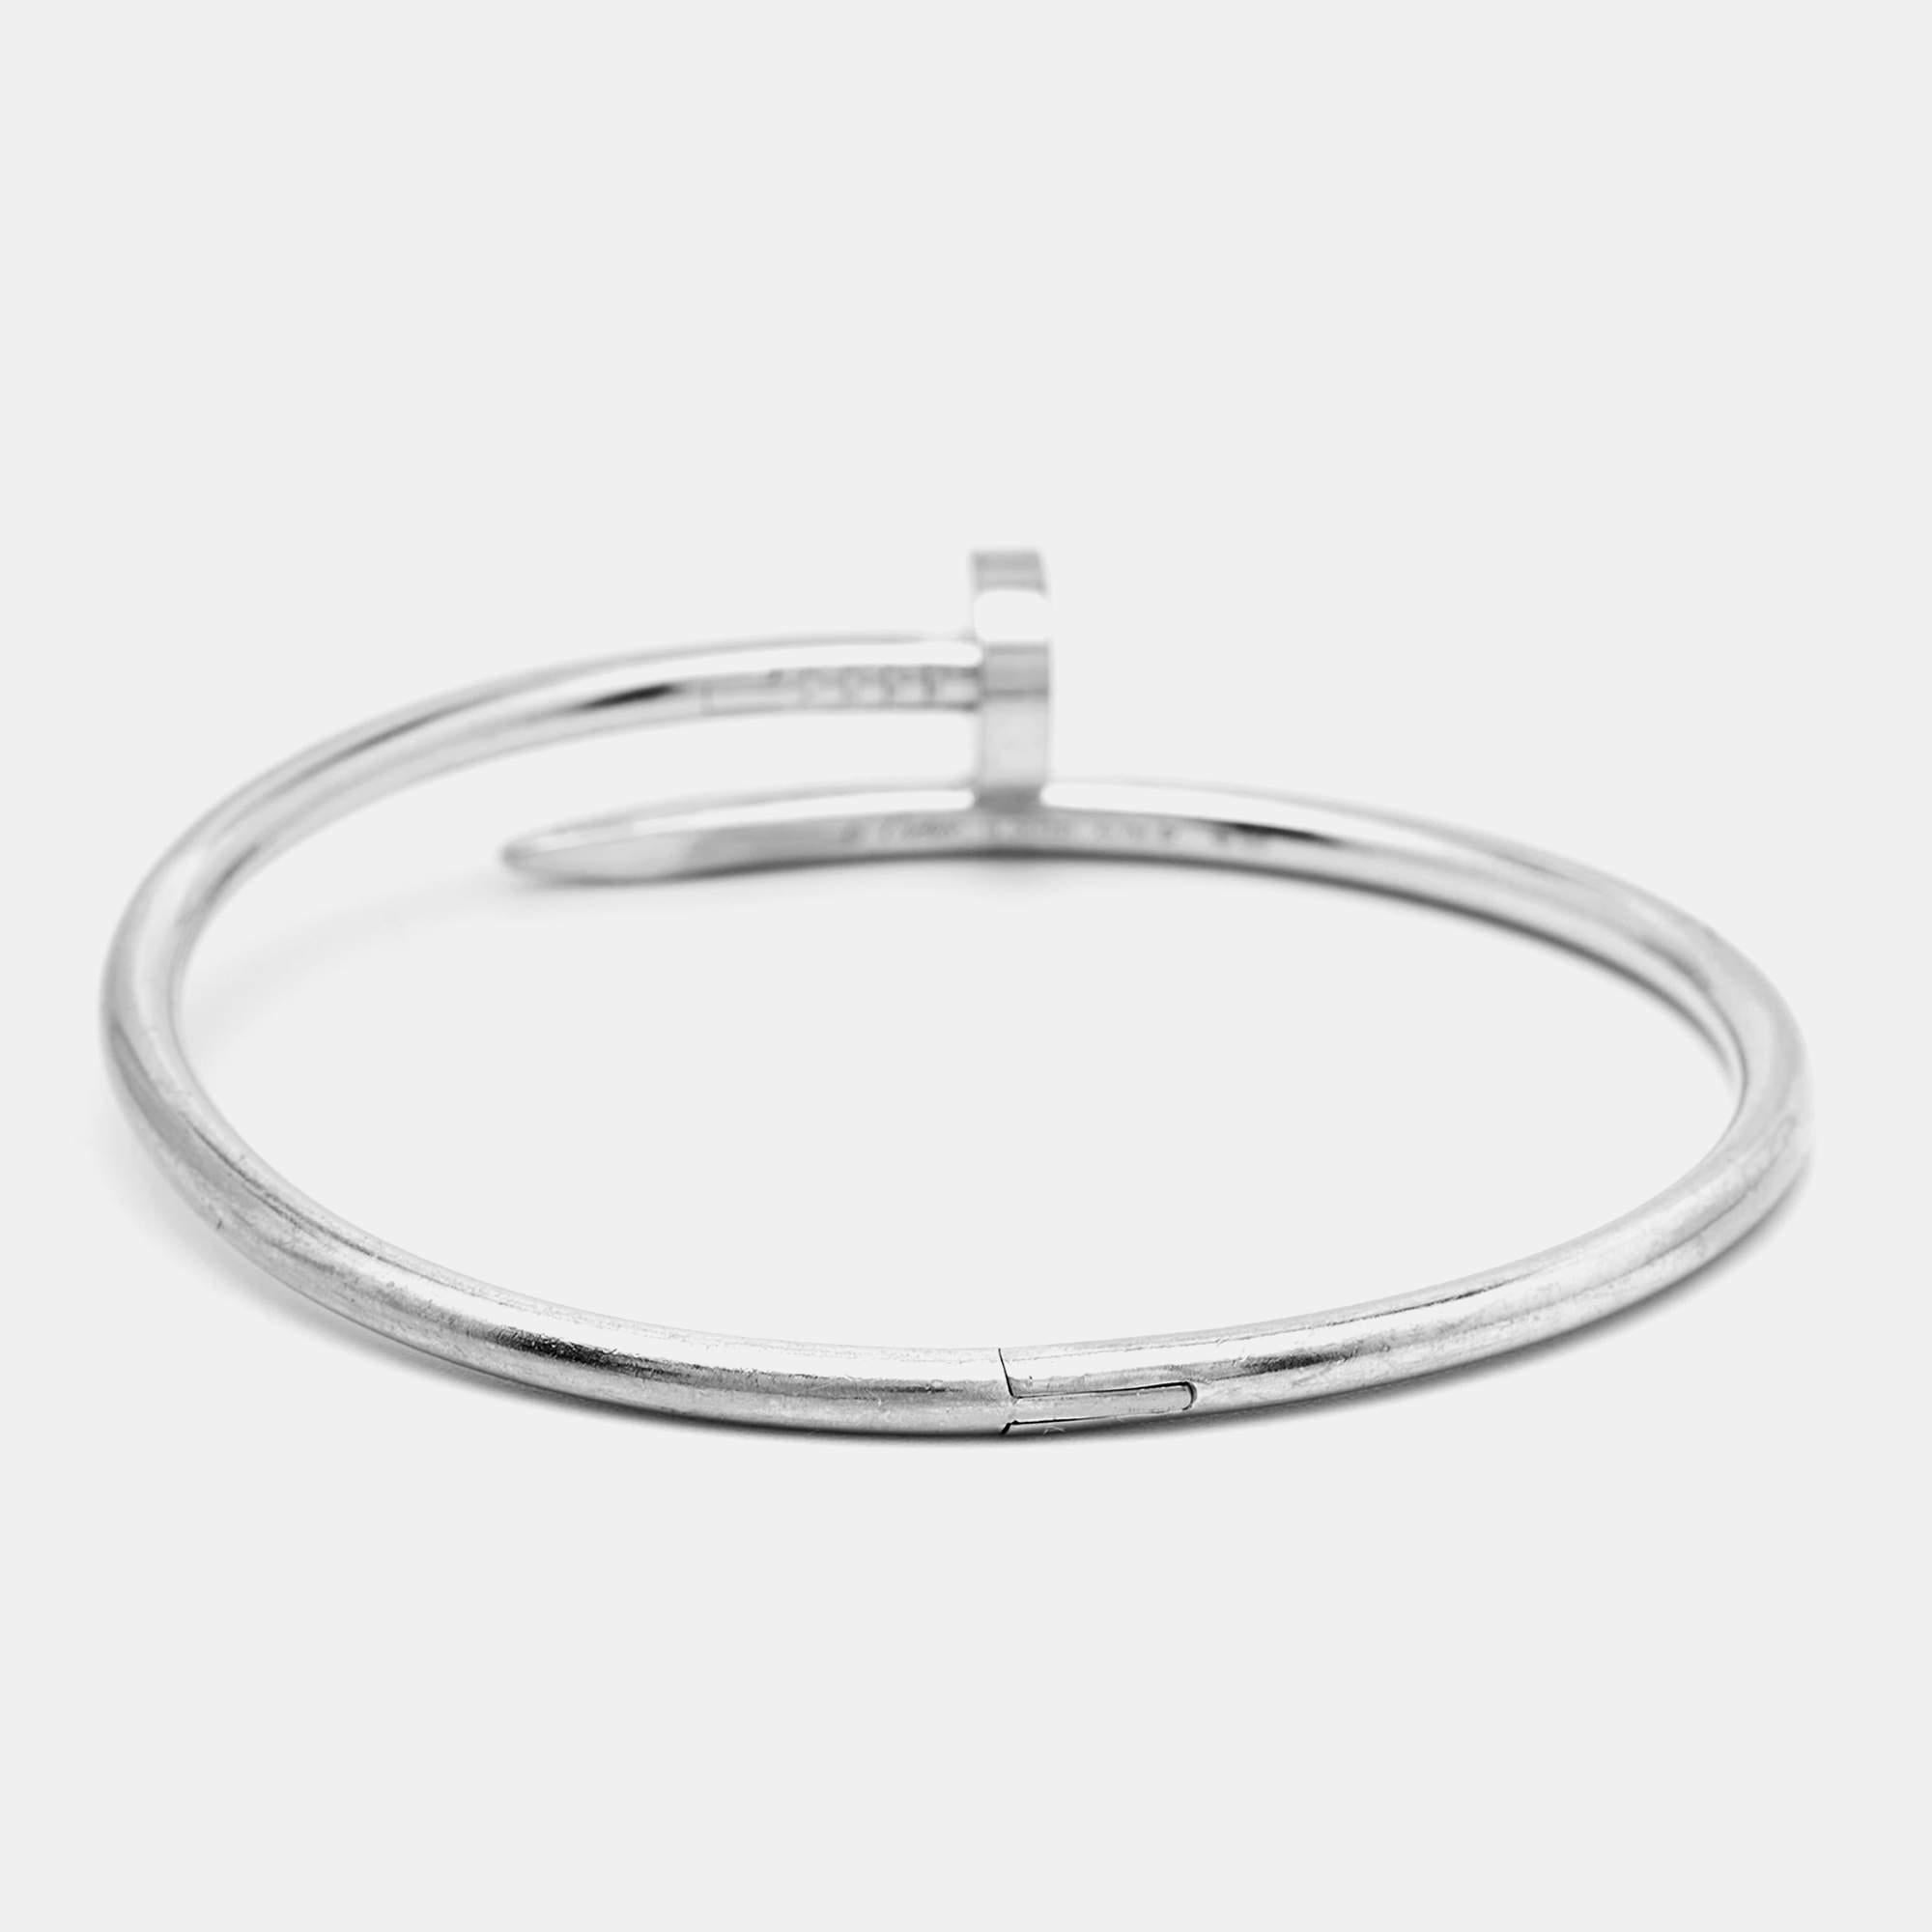 The Juste Un Clou collection from Cartier is all about making ordinary objects into exquisite pieces of jewelry. This Juste Un Clou bracelet is a creation that proudly represents the expertise and talent of the artisans working with Cartier to